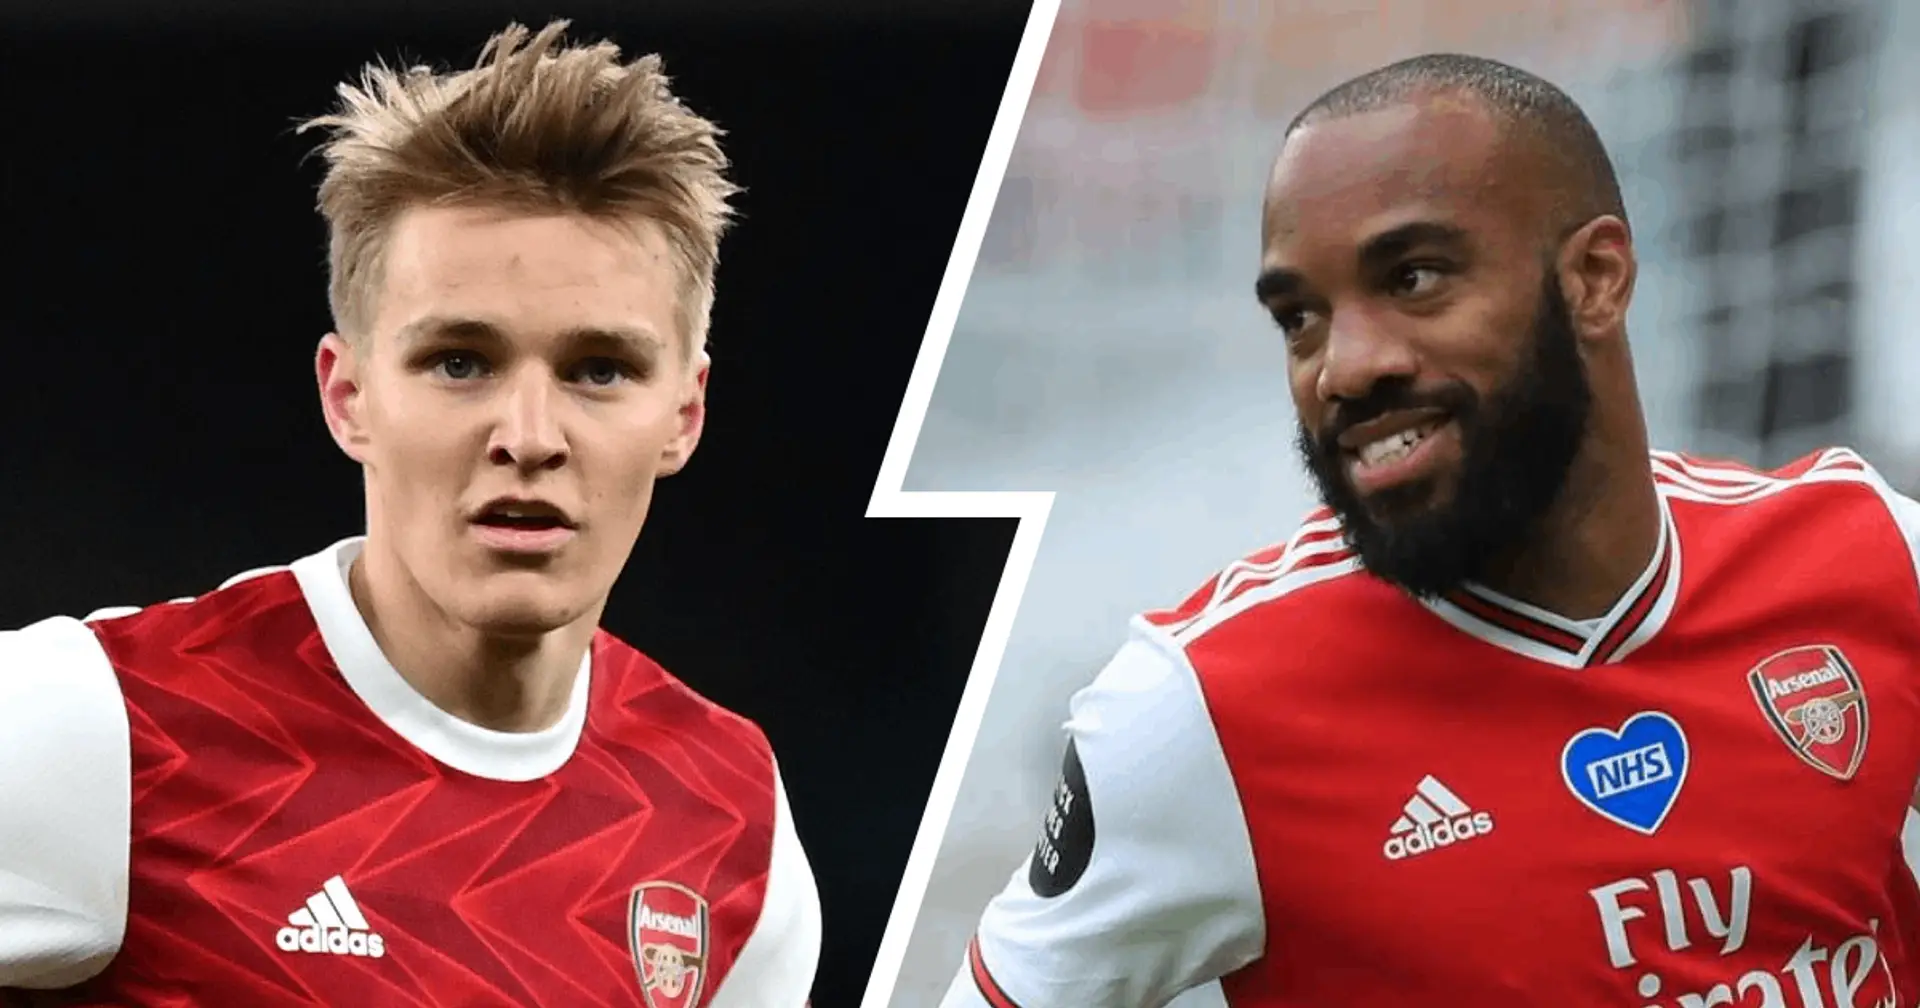 'Odegaard's loan move is a no-win situation', 'I have no idea why we want Lacazette to go': 4 best fan reactions to the hottest Arsenal topics over the last 24 hours